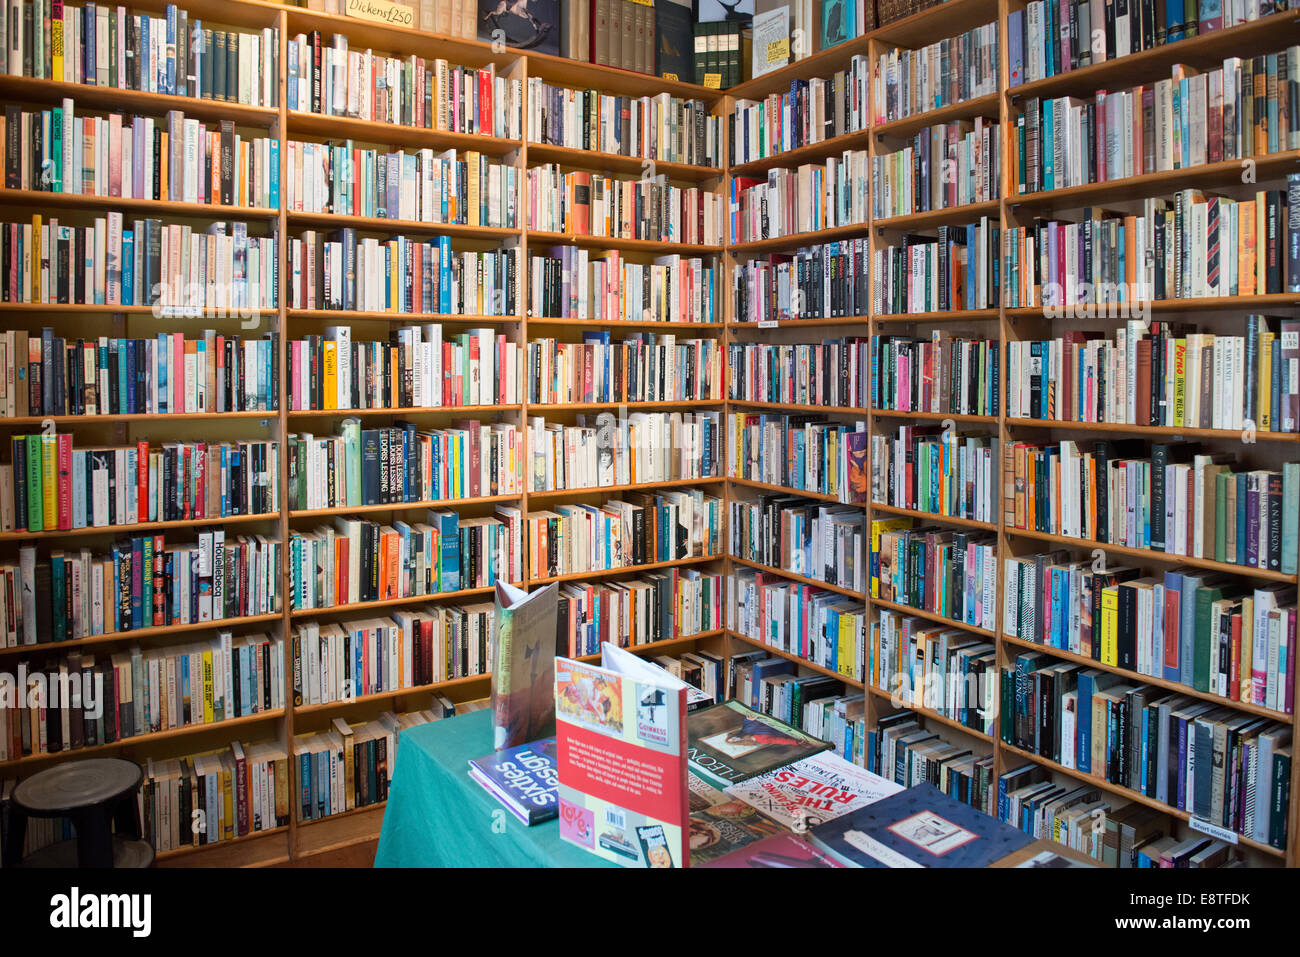 shelves in a second hand book shop filled with books and more books on display Stock Photo